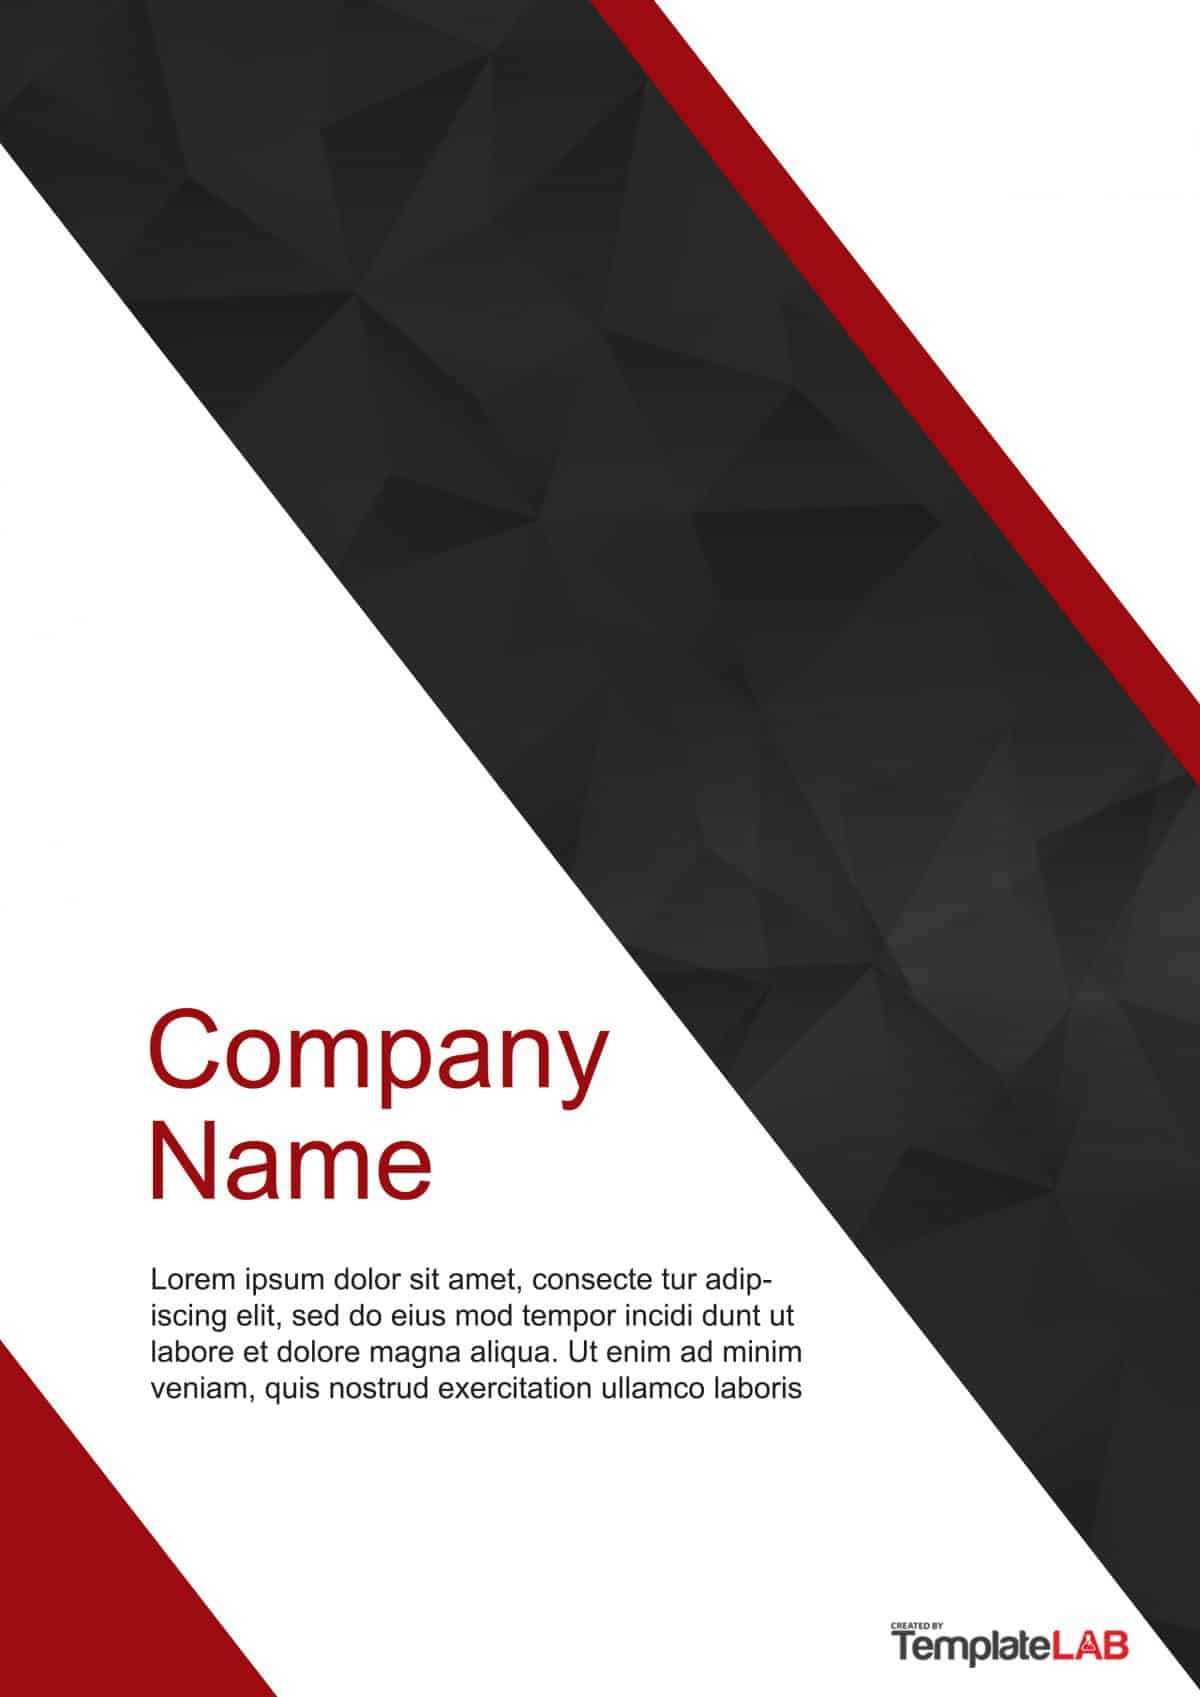 39 Amazing Cover Page Templates (Word + Psd) ᐅ Templatelab In Cover Page Of Report Template In Word